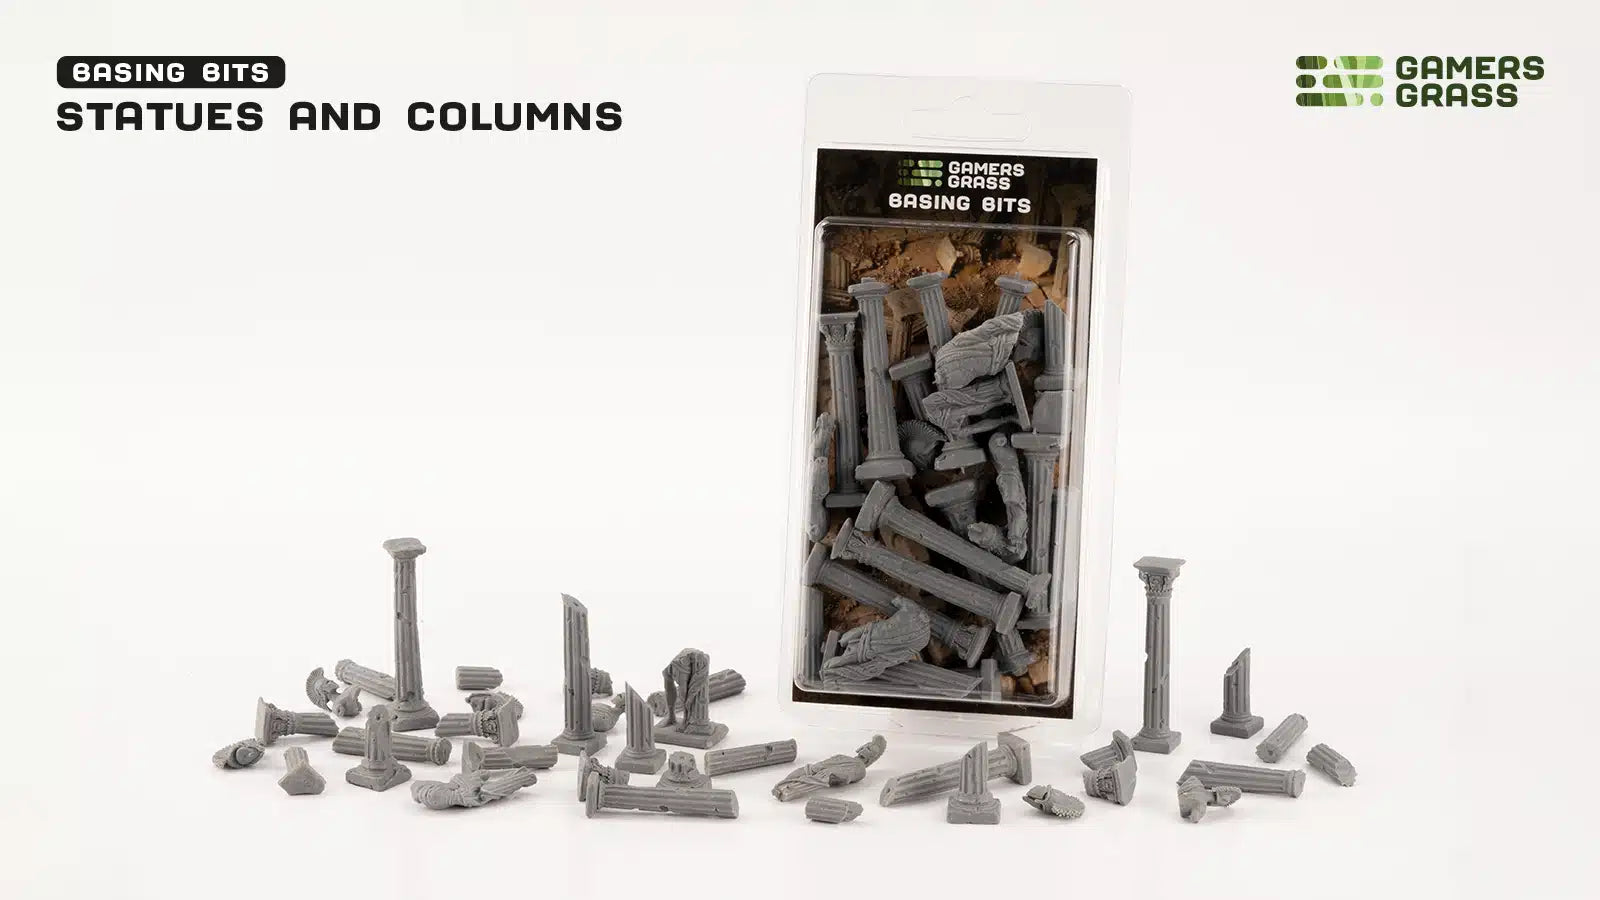 Gamers Grass: Basing Bits Statues and Columns